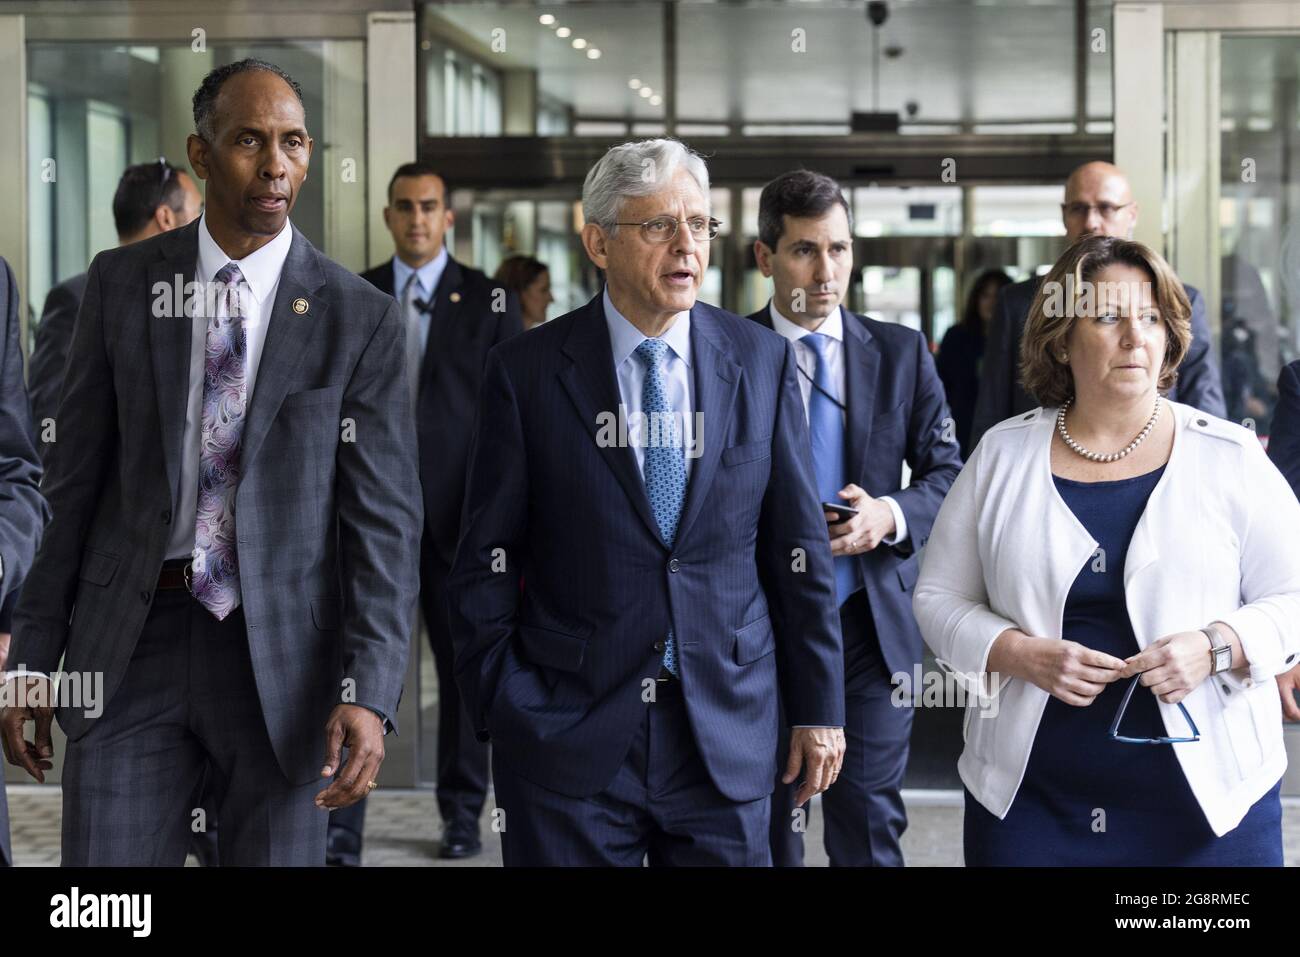 US Attorney General Merrick Garland (C), along with Deputy Attorney General Lisa Monaco (R), and Acting Alcohol, Tobacco and Firearms (ATF) Director Marvin G. Richardson (L), departs after announcing the launch of the Justice Department's 'five cross-jurisdictional trafficking strike forces' at the ATF in Washington, DC, USA, 22 July, 2021. The strike forces will seek to reduce firearms trafficking corridors, with a focus on New York, Chicago, Los Angeles, the San Francisco Bay and Sacramento Region, and Washington, DC. Pool Photo by Jim Lo Scalzo/UPI Stock Photo